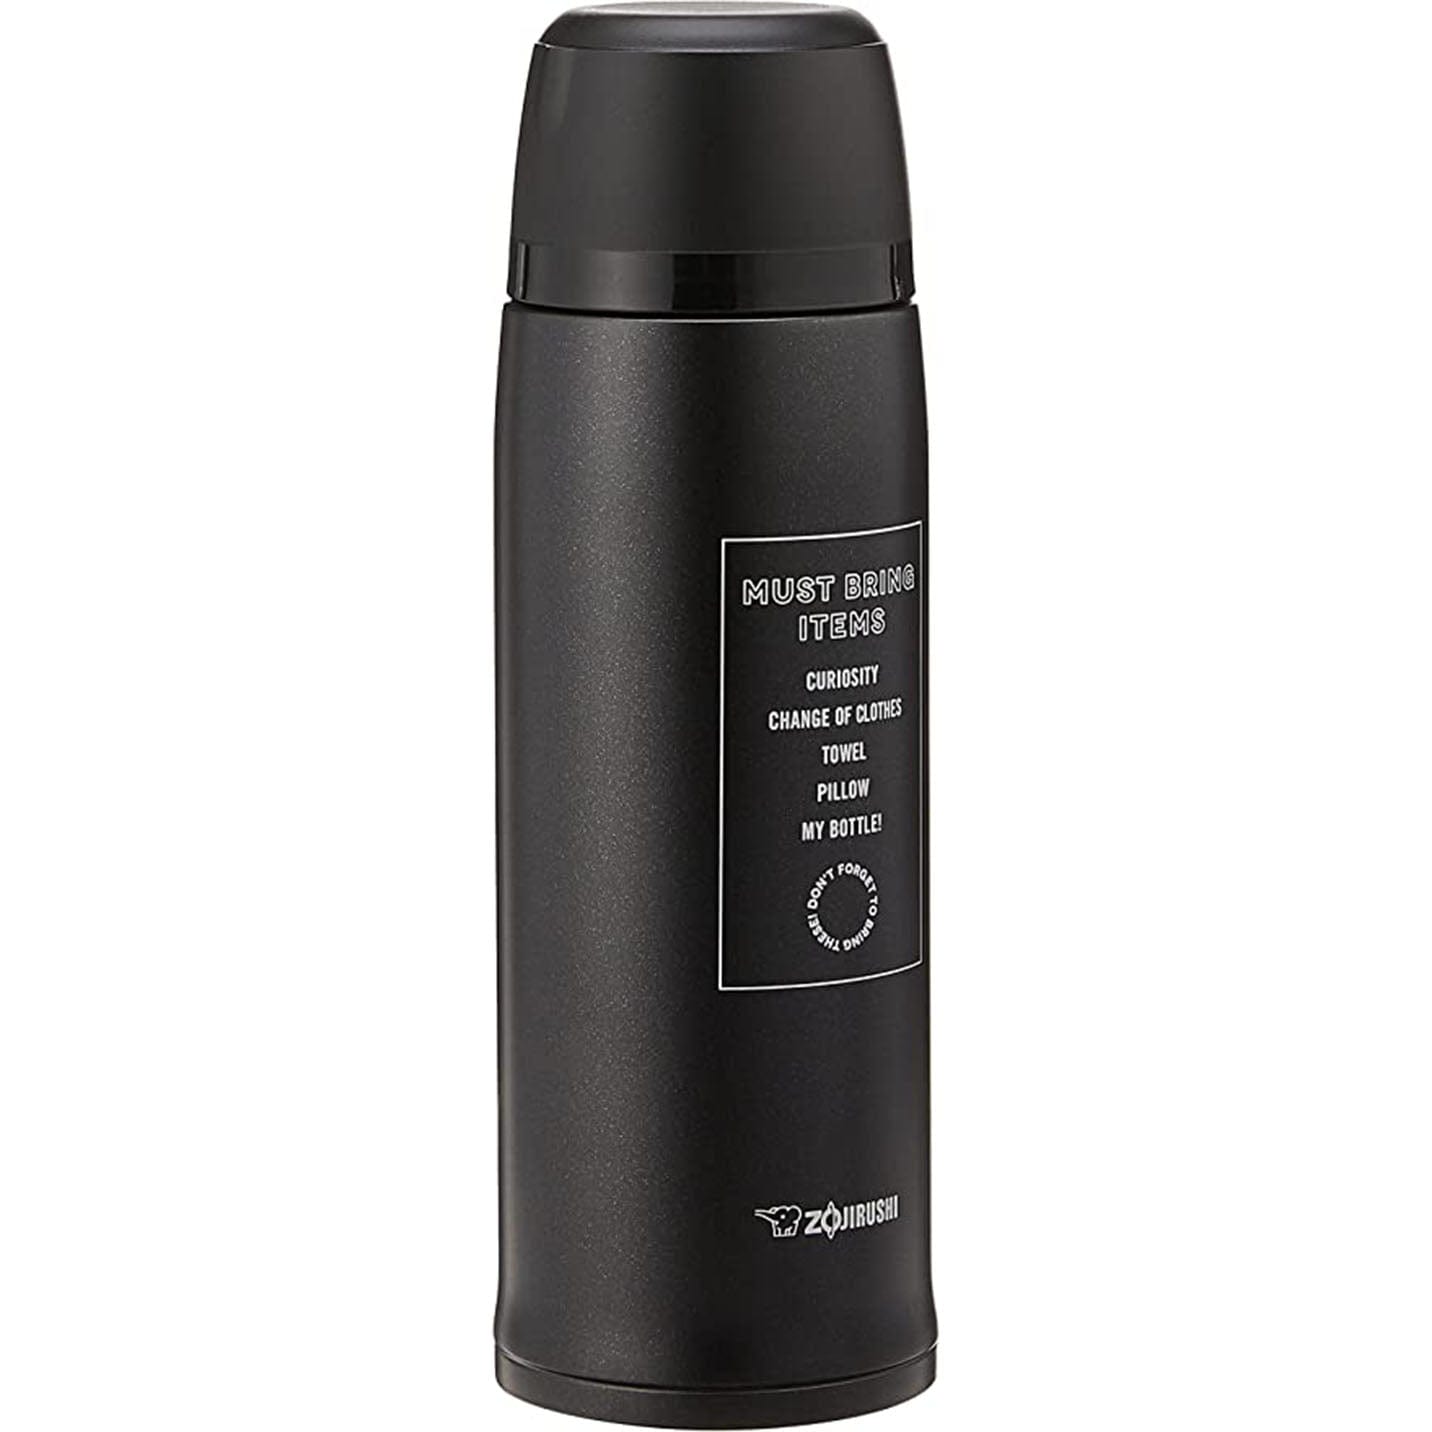 Zojirushi Stainless Steel Vacuum Flask With Cup, 0-82 Ltr Capacity, Black